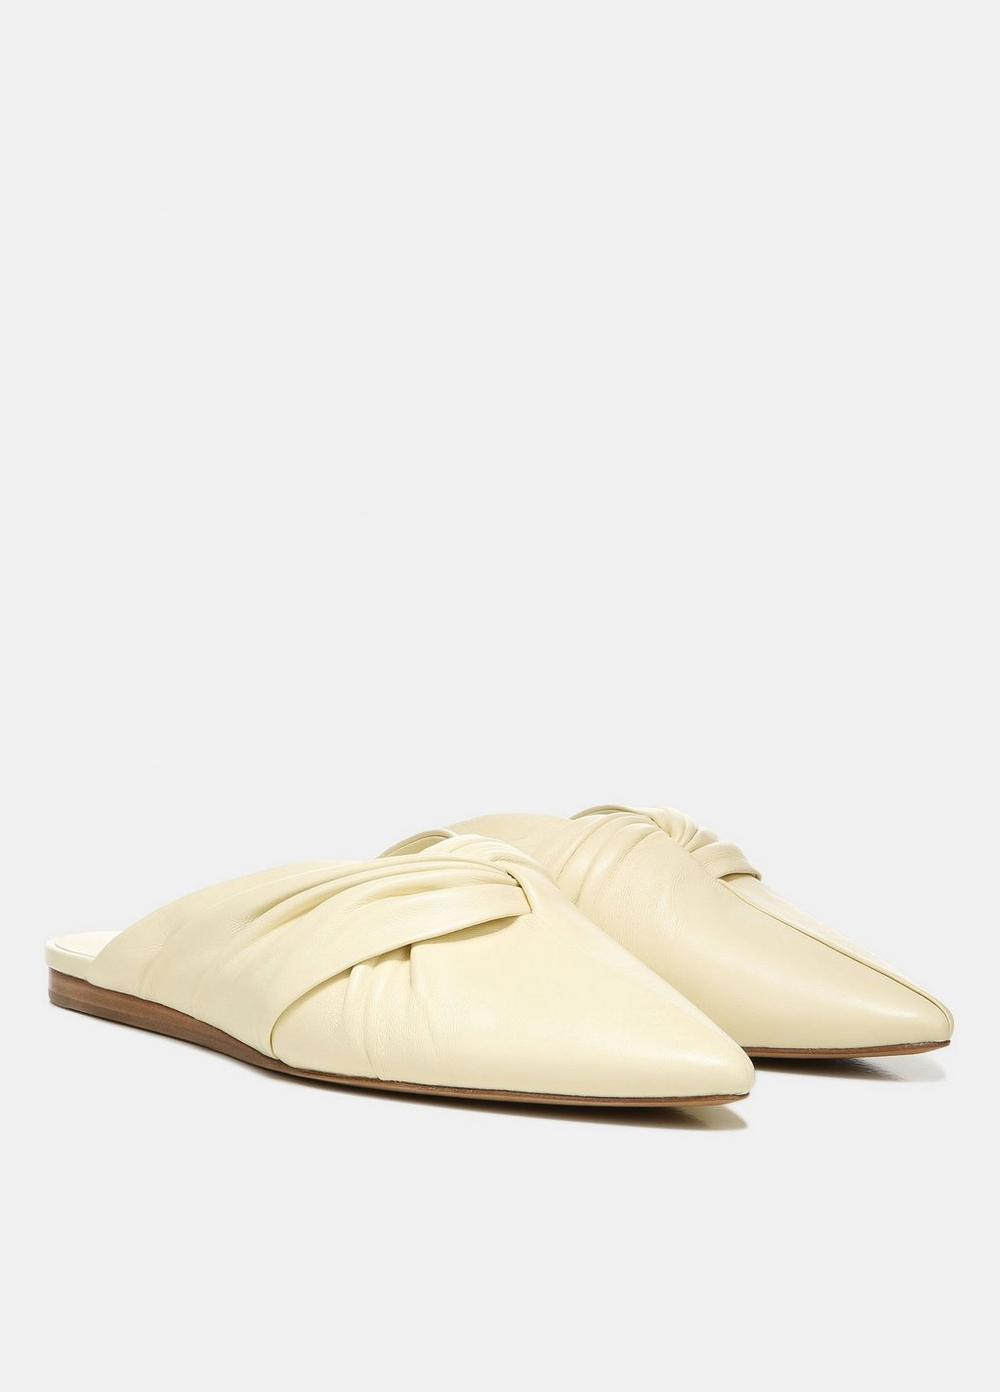 Crenne Leather Flat for Women | Vince